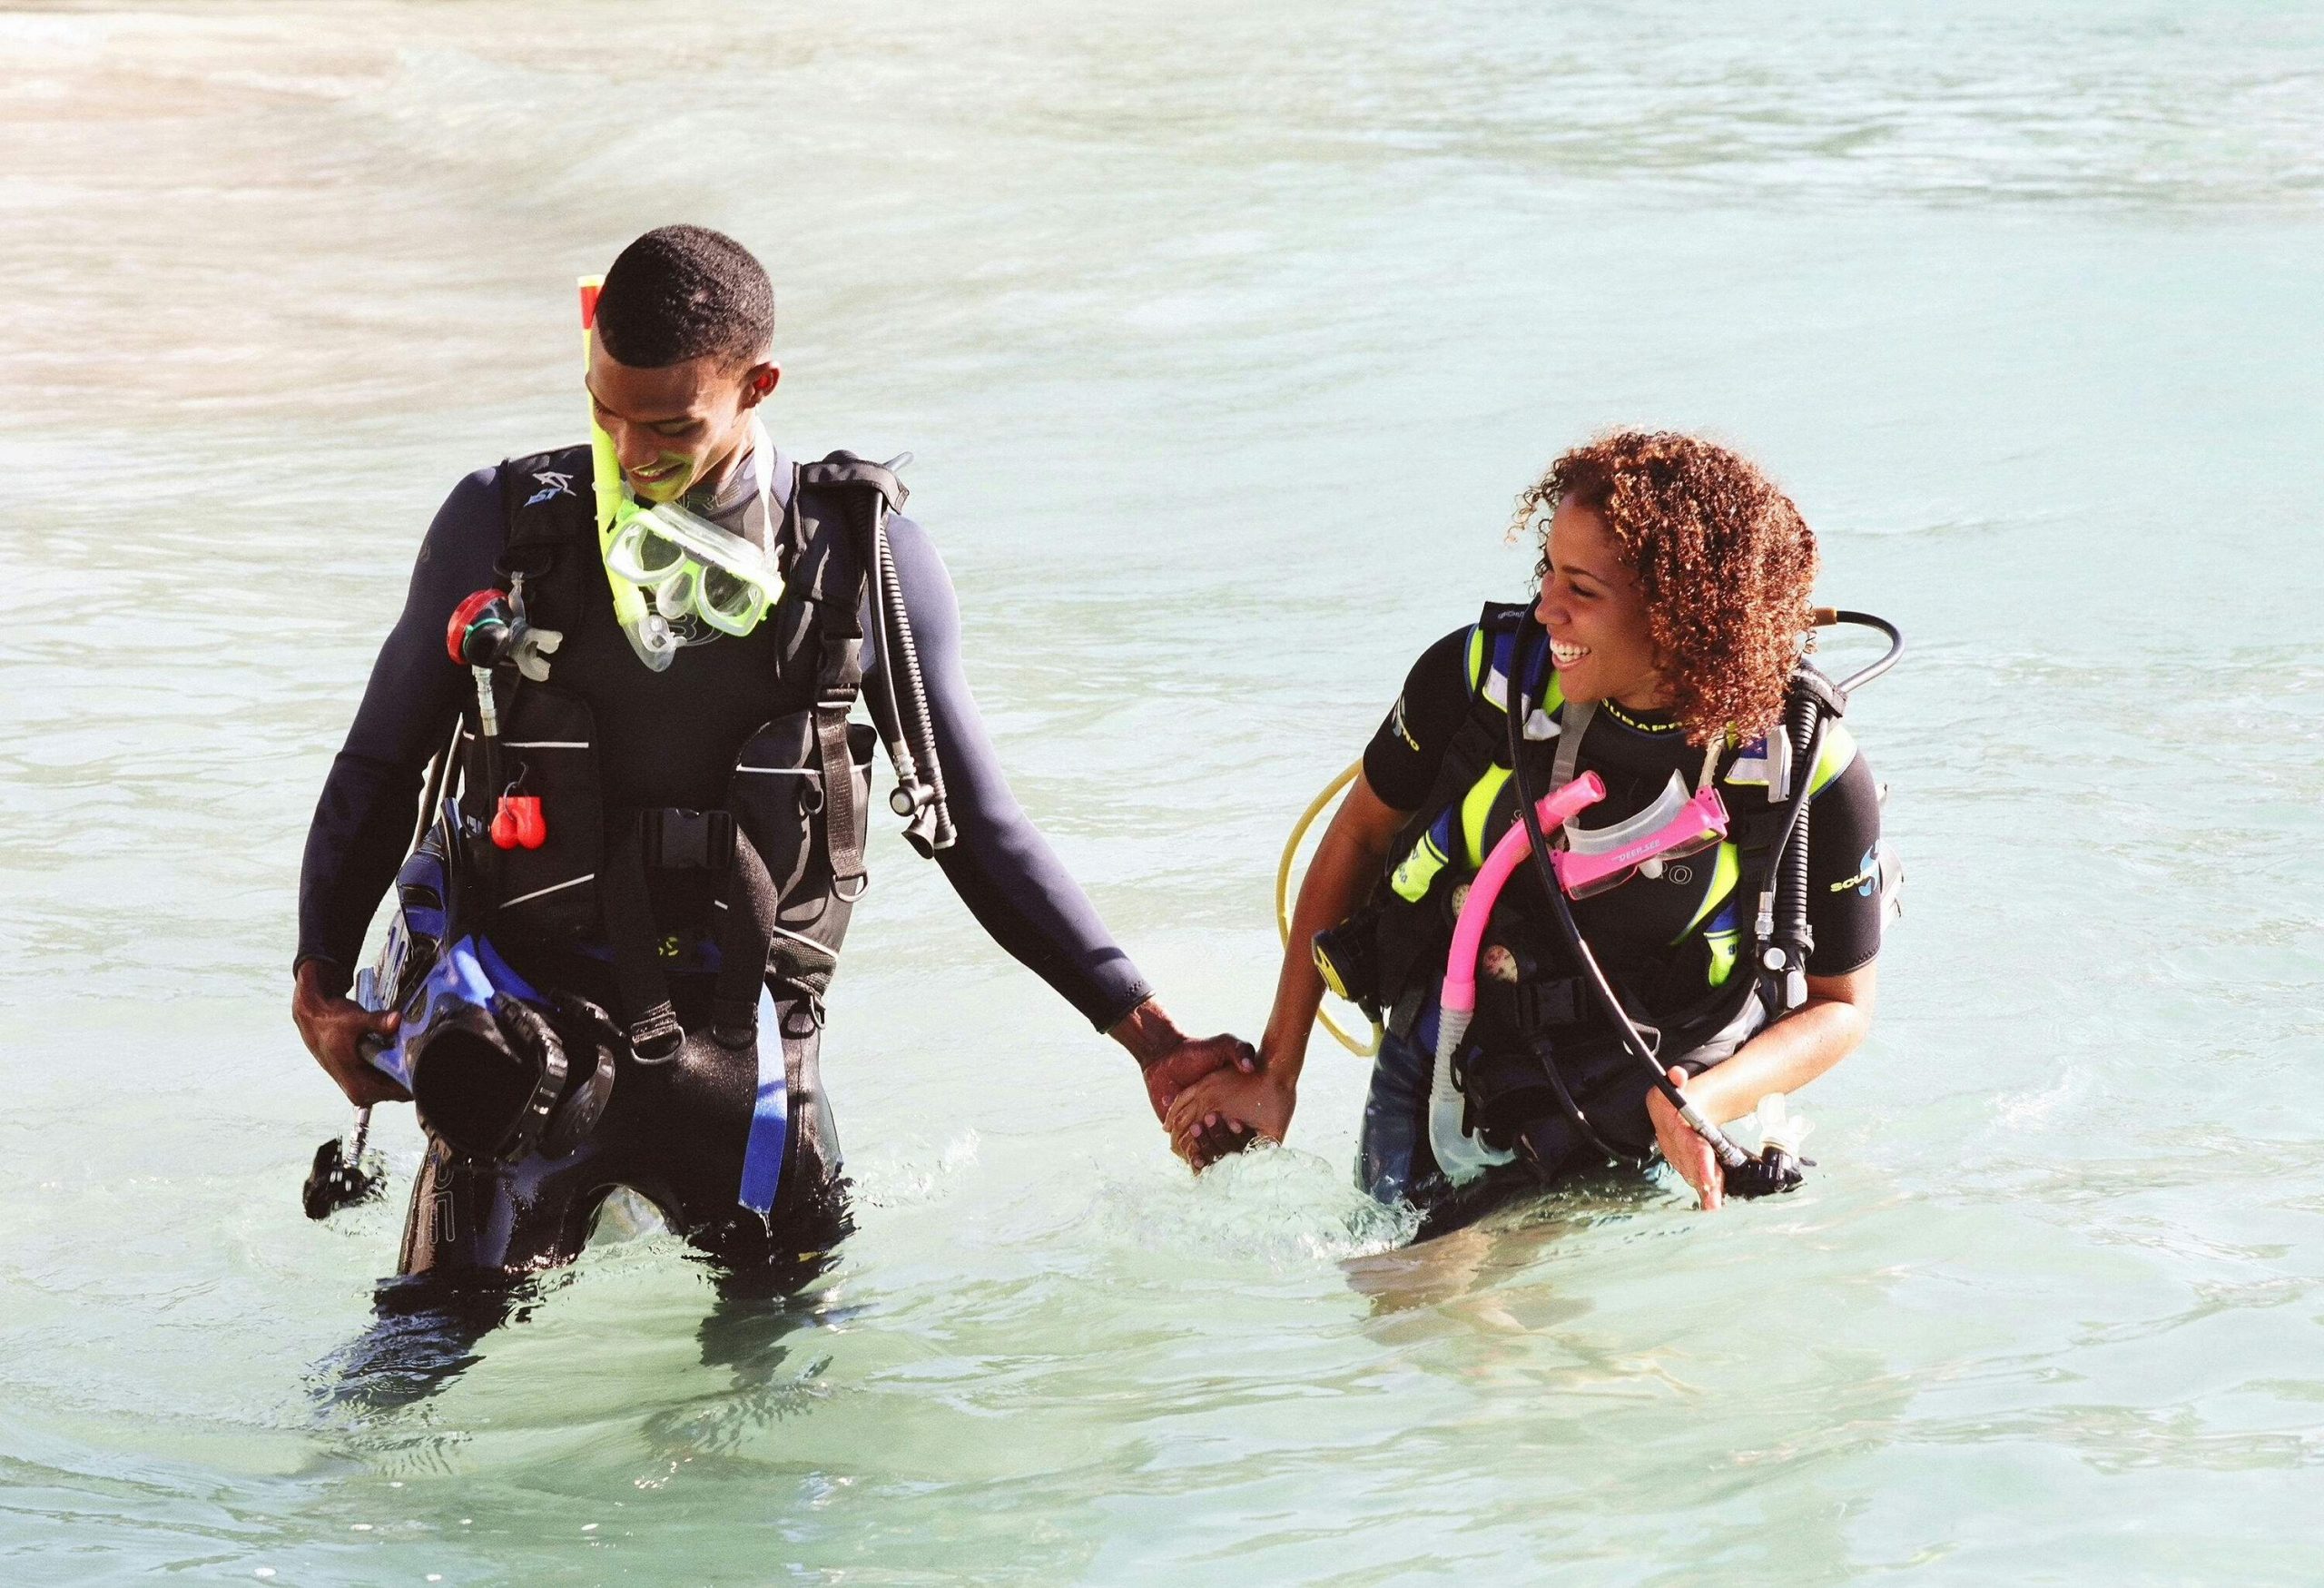 A couple wearing wetsuits and carrying snorkelling equipment wading in the water holding hands.